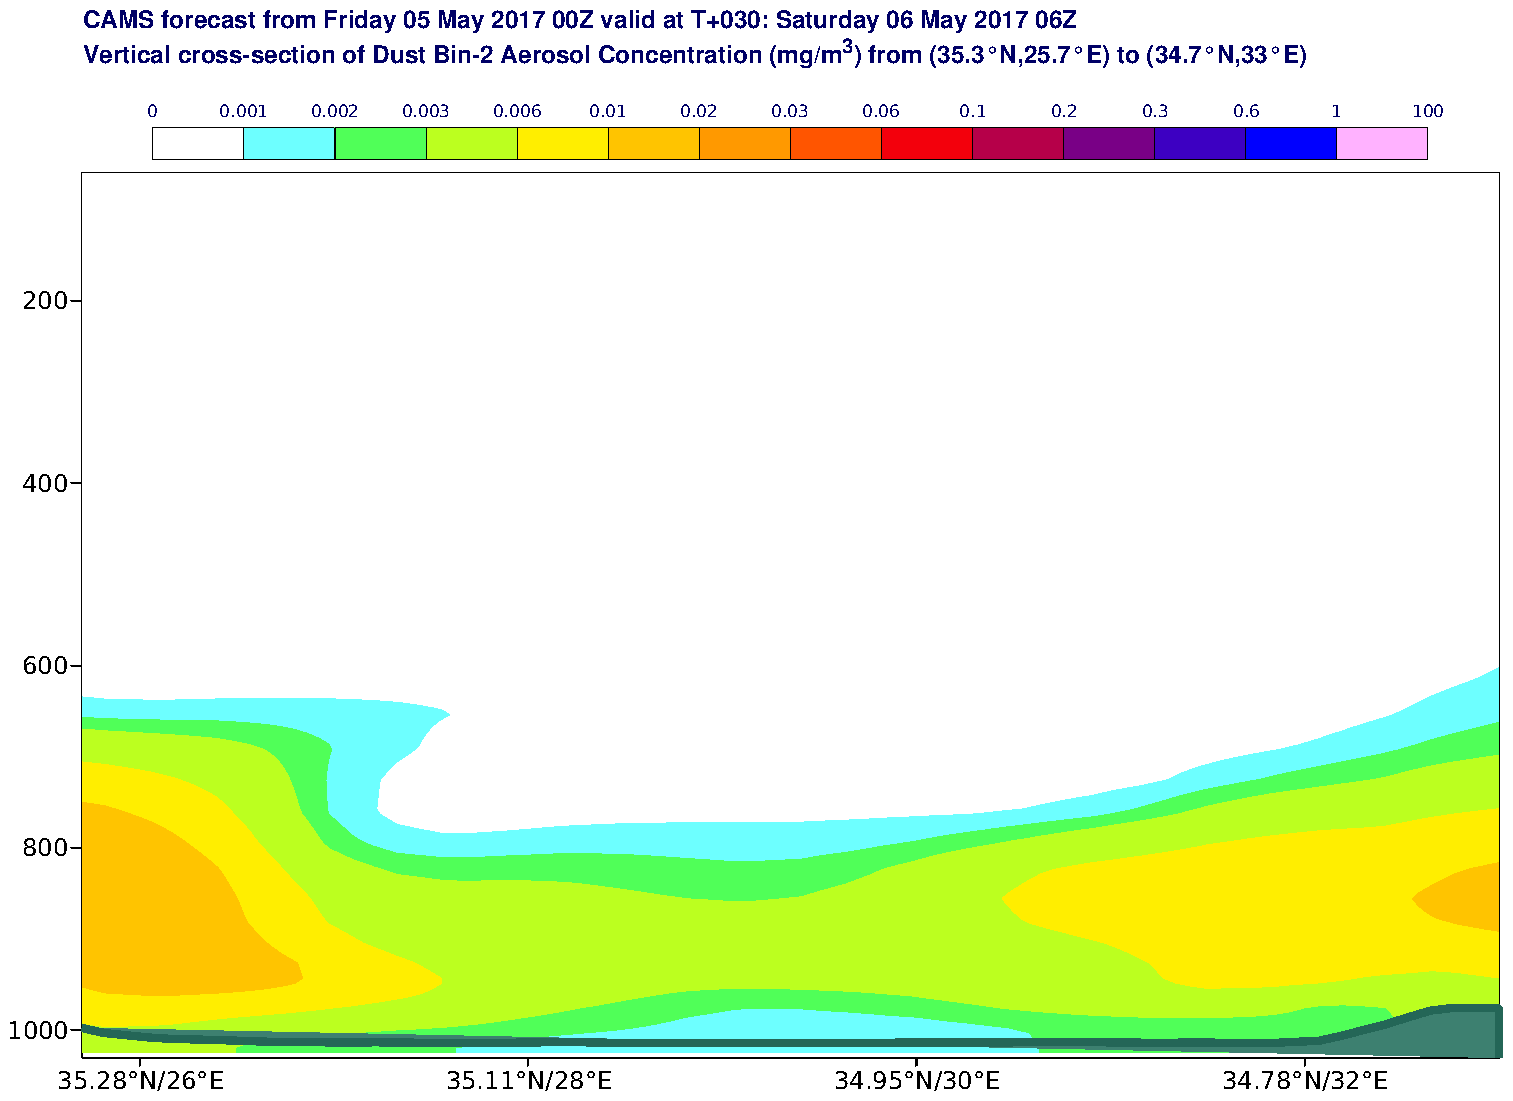 Vertical cross-section of Dust Bin-2 Aerosol Concentration (mg/m3) valid at T30 - 2017-05-06 06:00